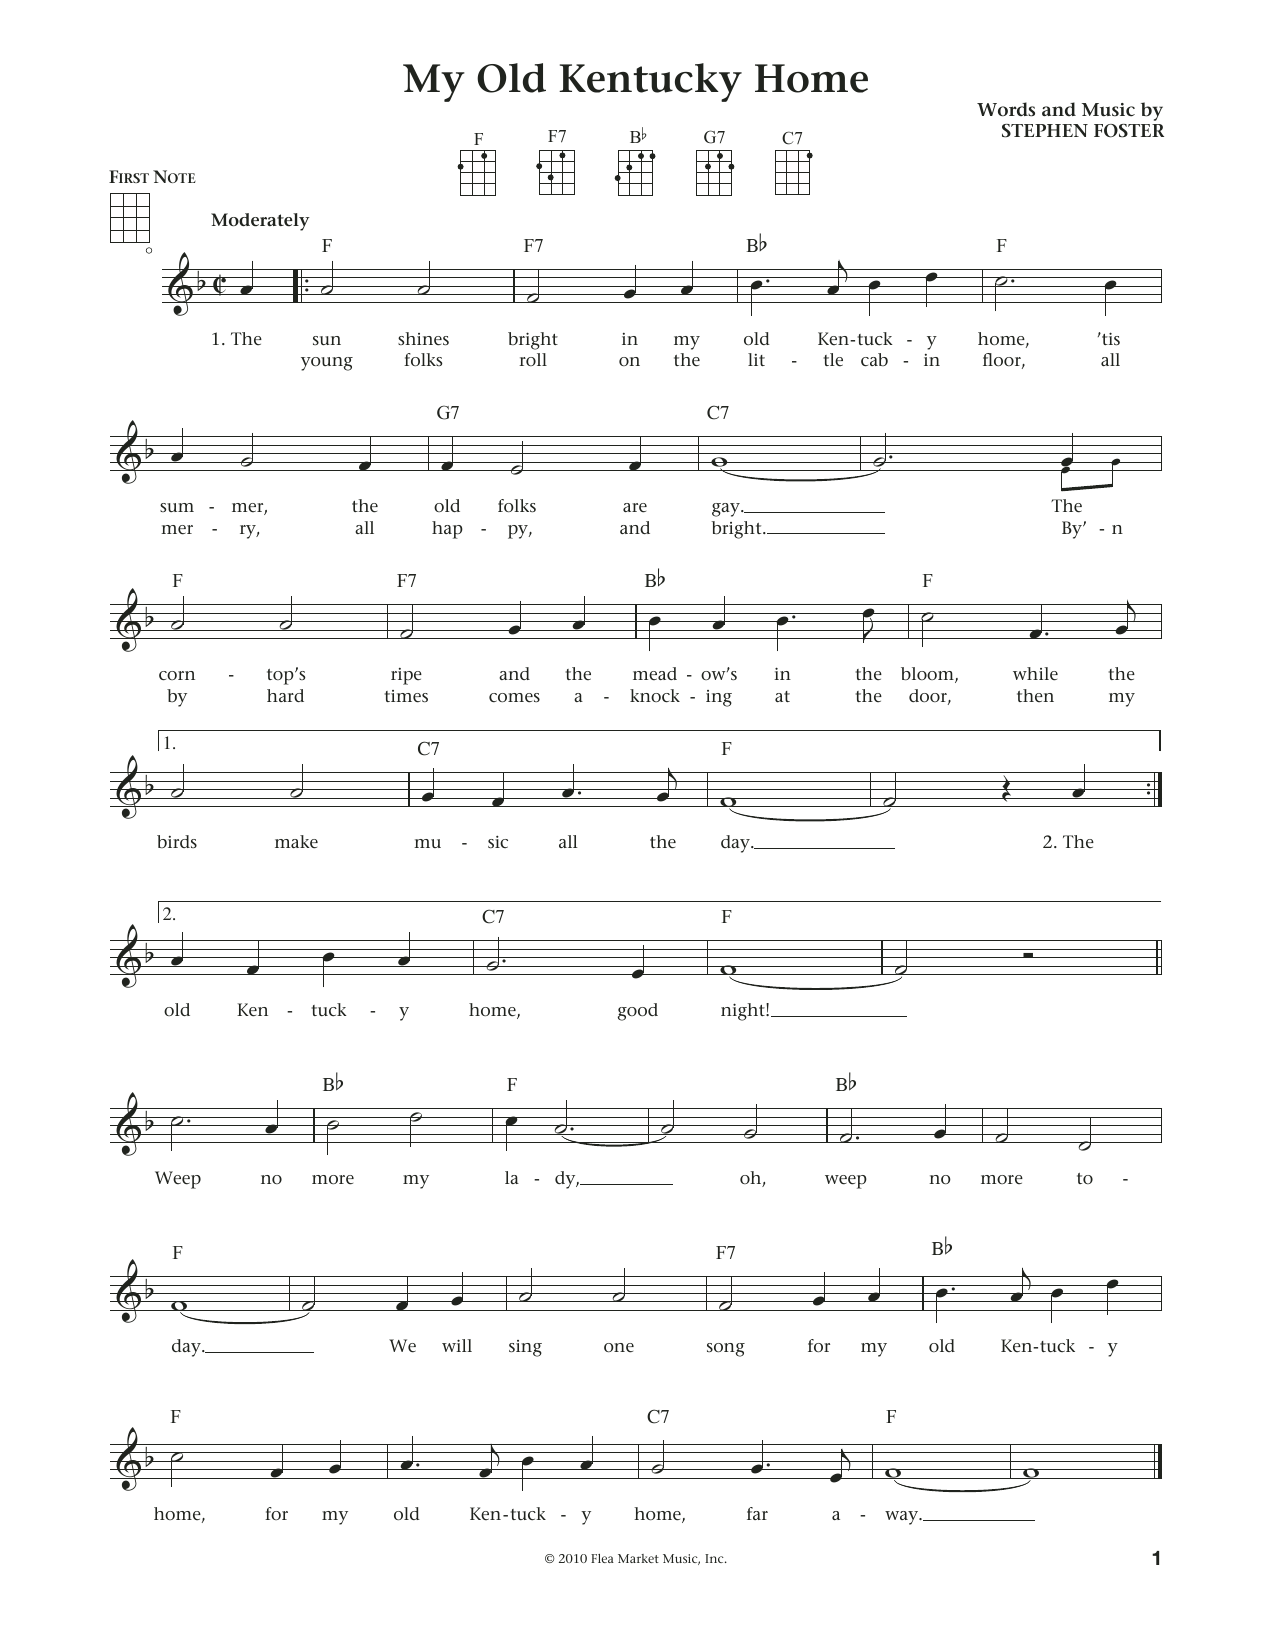 Download Stephen C. Foster My Old Kentucky Home (from The Daily Uk Sheet Music